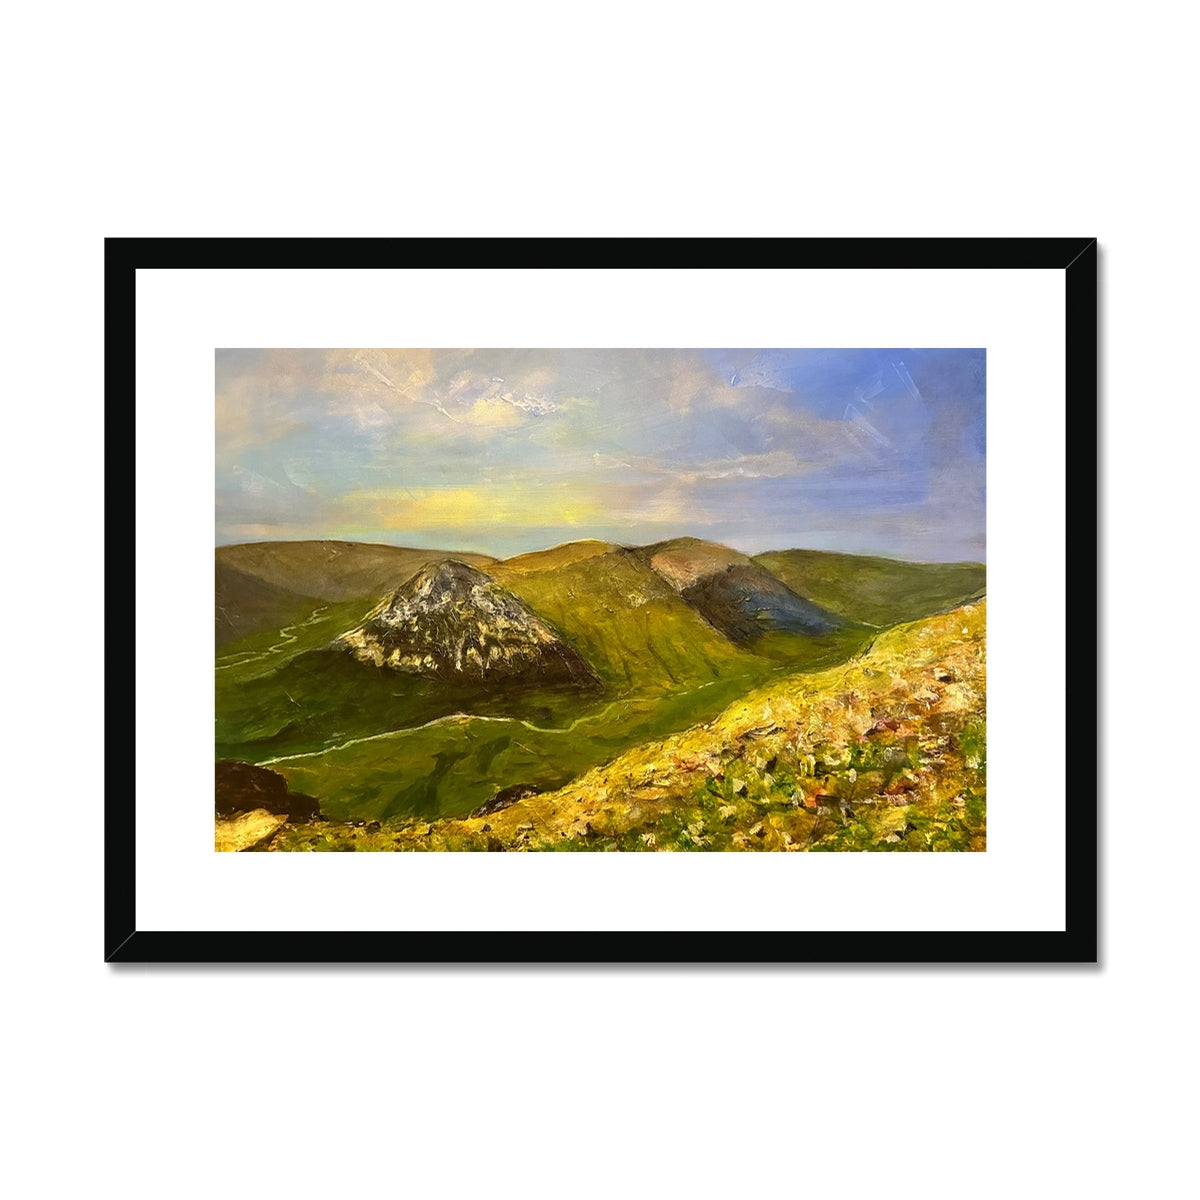 The Devil’s Point From Cairn a Mhaim Painting | Framed & Mounted Prints From Scotland-Framed & Mounted Prints-Scottish Lochs & Mountains Art Gallery-A2 Landscape-Black Frame-Paintings, Prints, Homeware, Art Gifts From Scotland By Scottish Artist Kevin Hunter